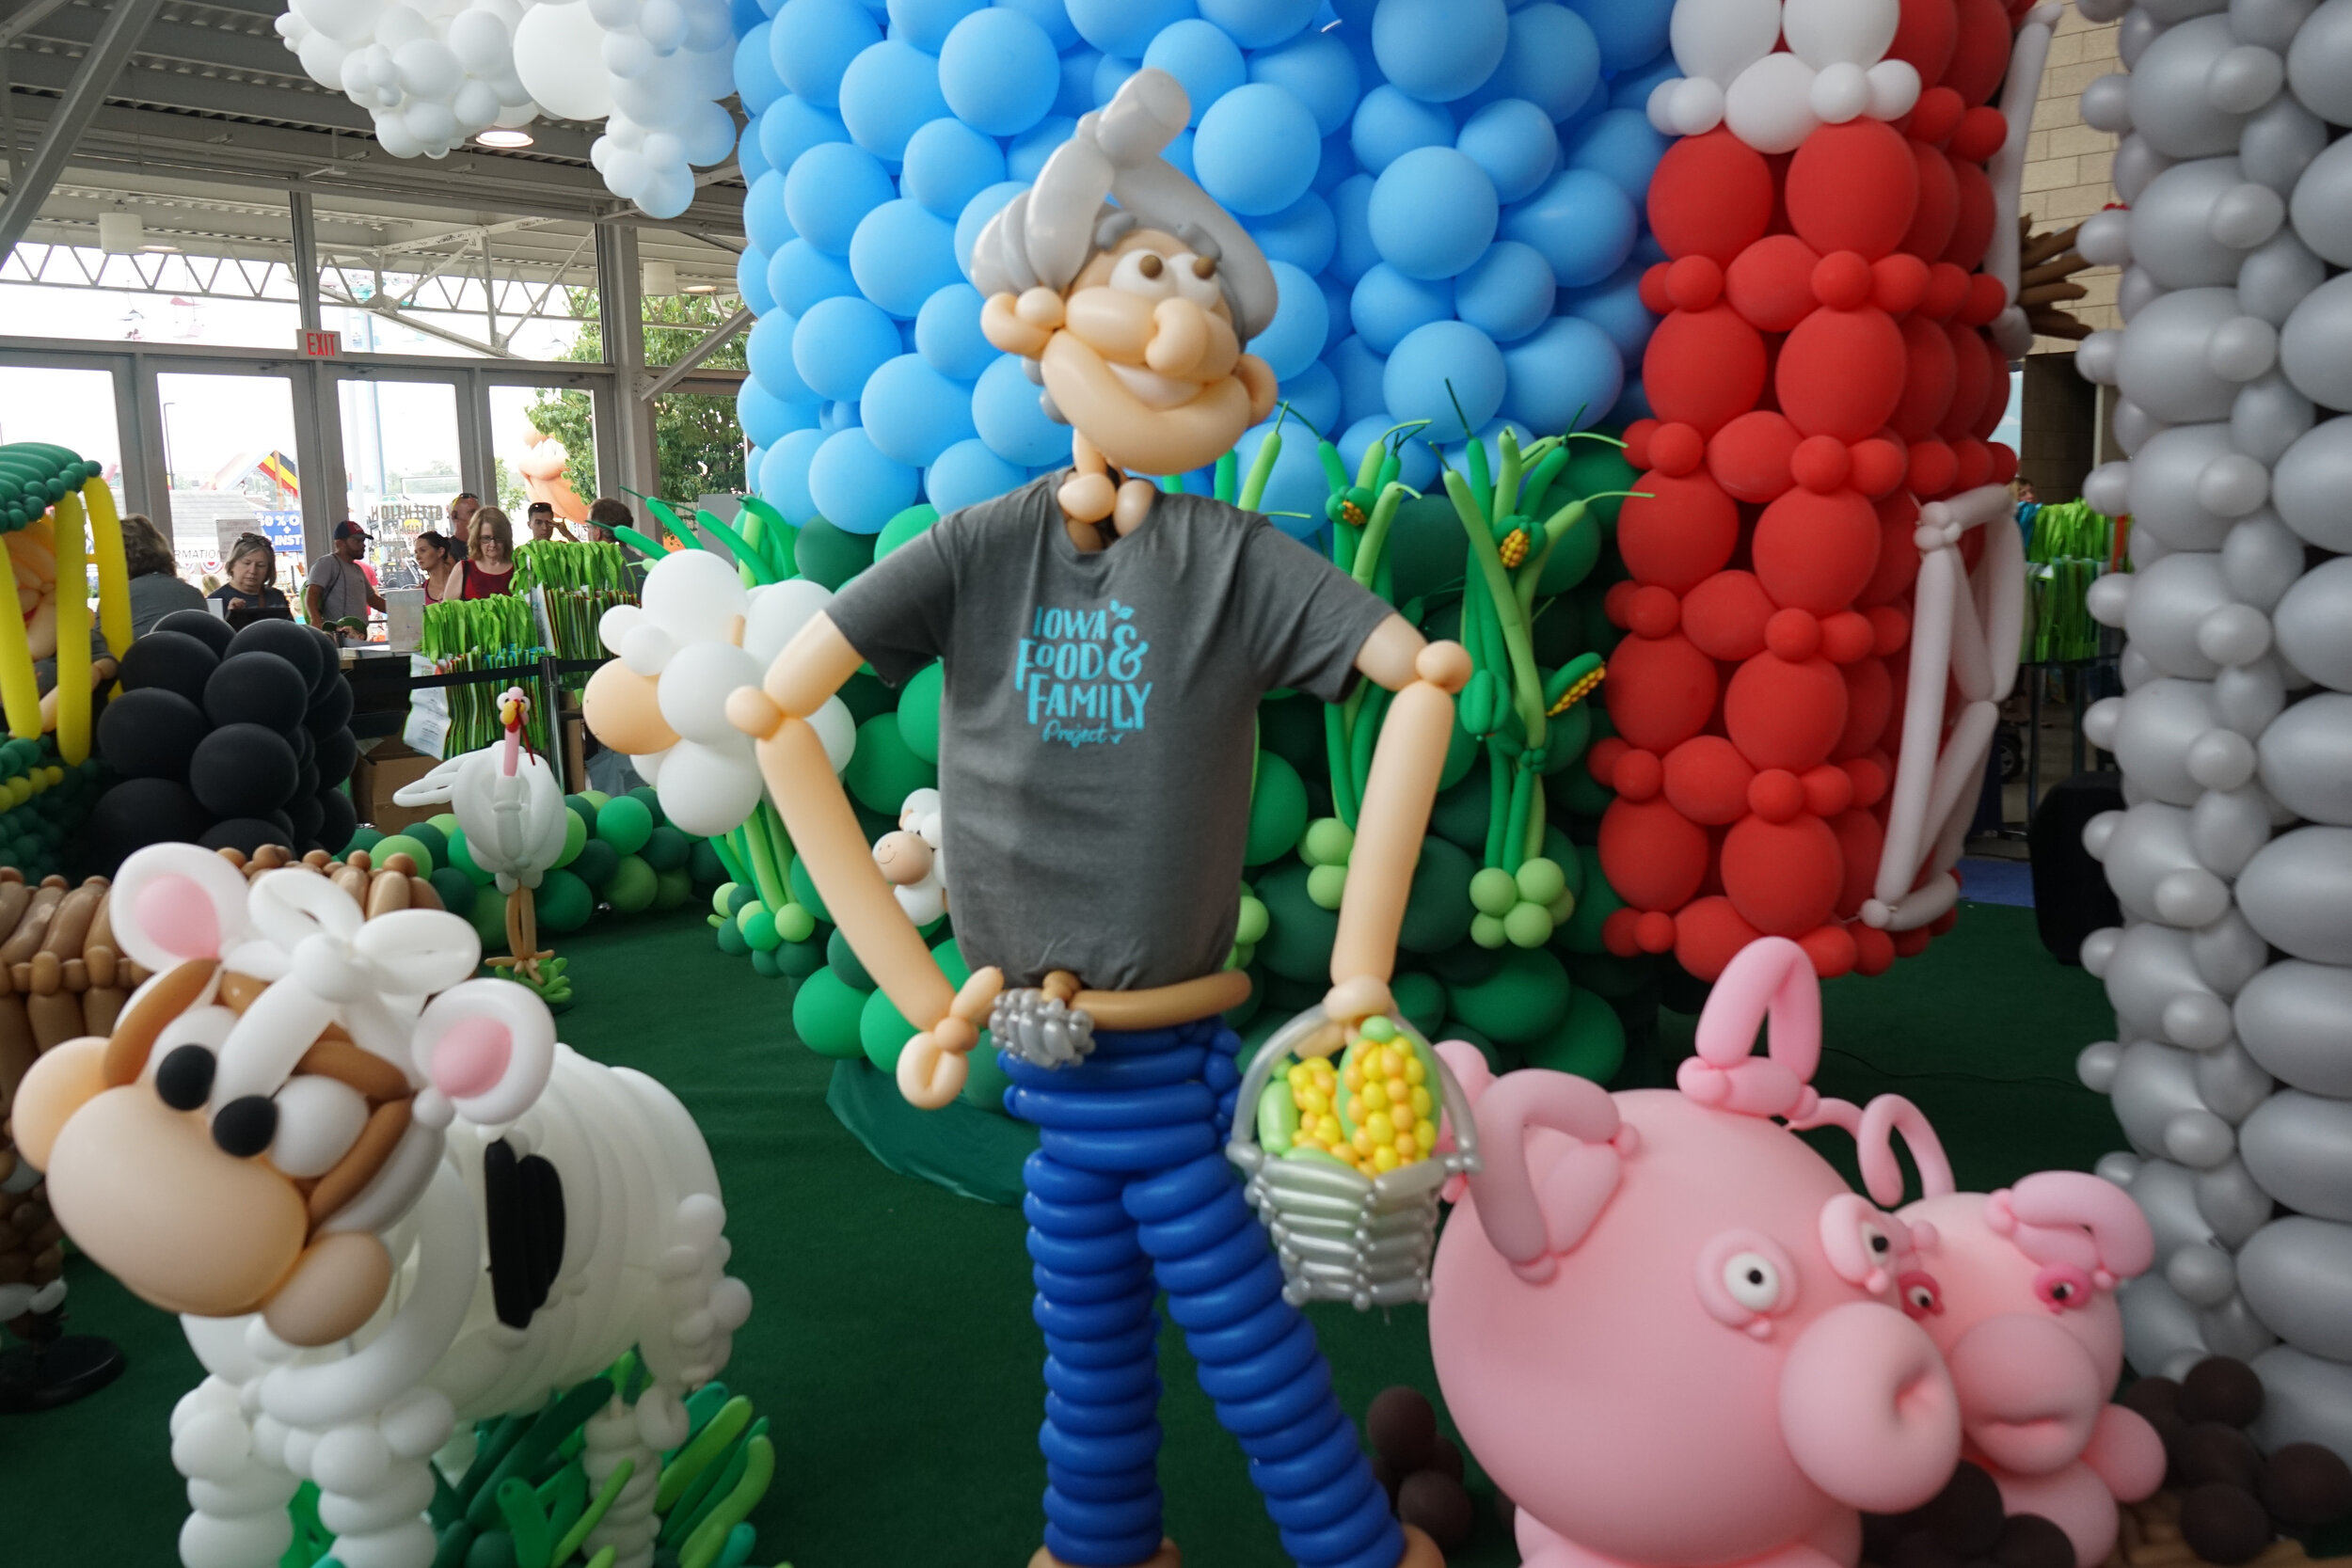 In 2017, the display showcased a farm scene sculpted from 23,749 balloons.